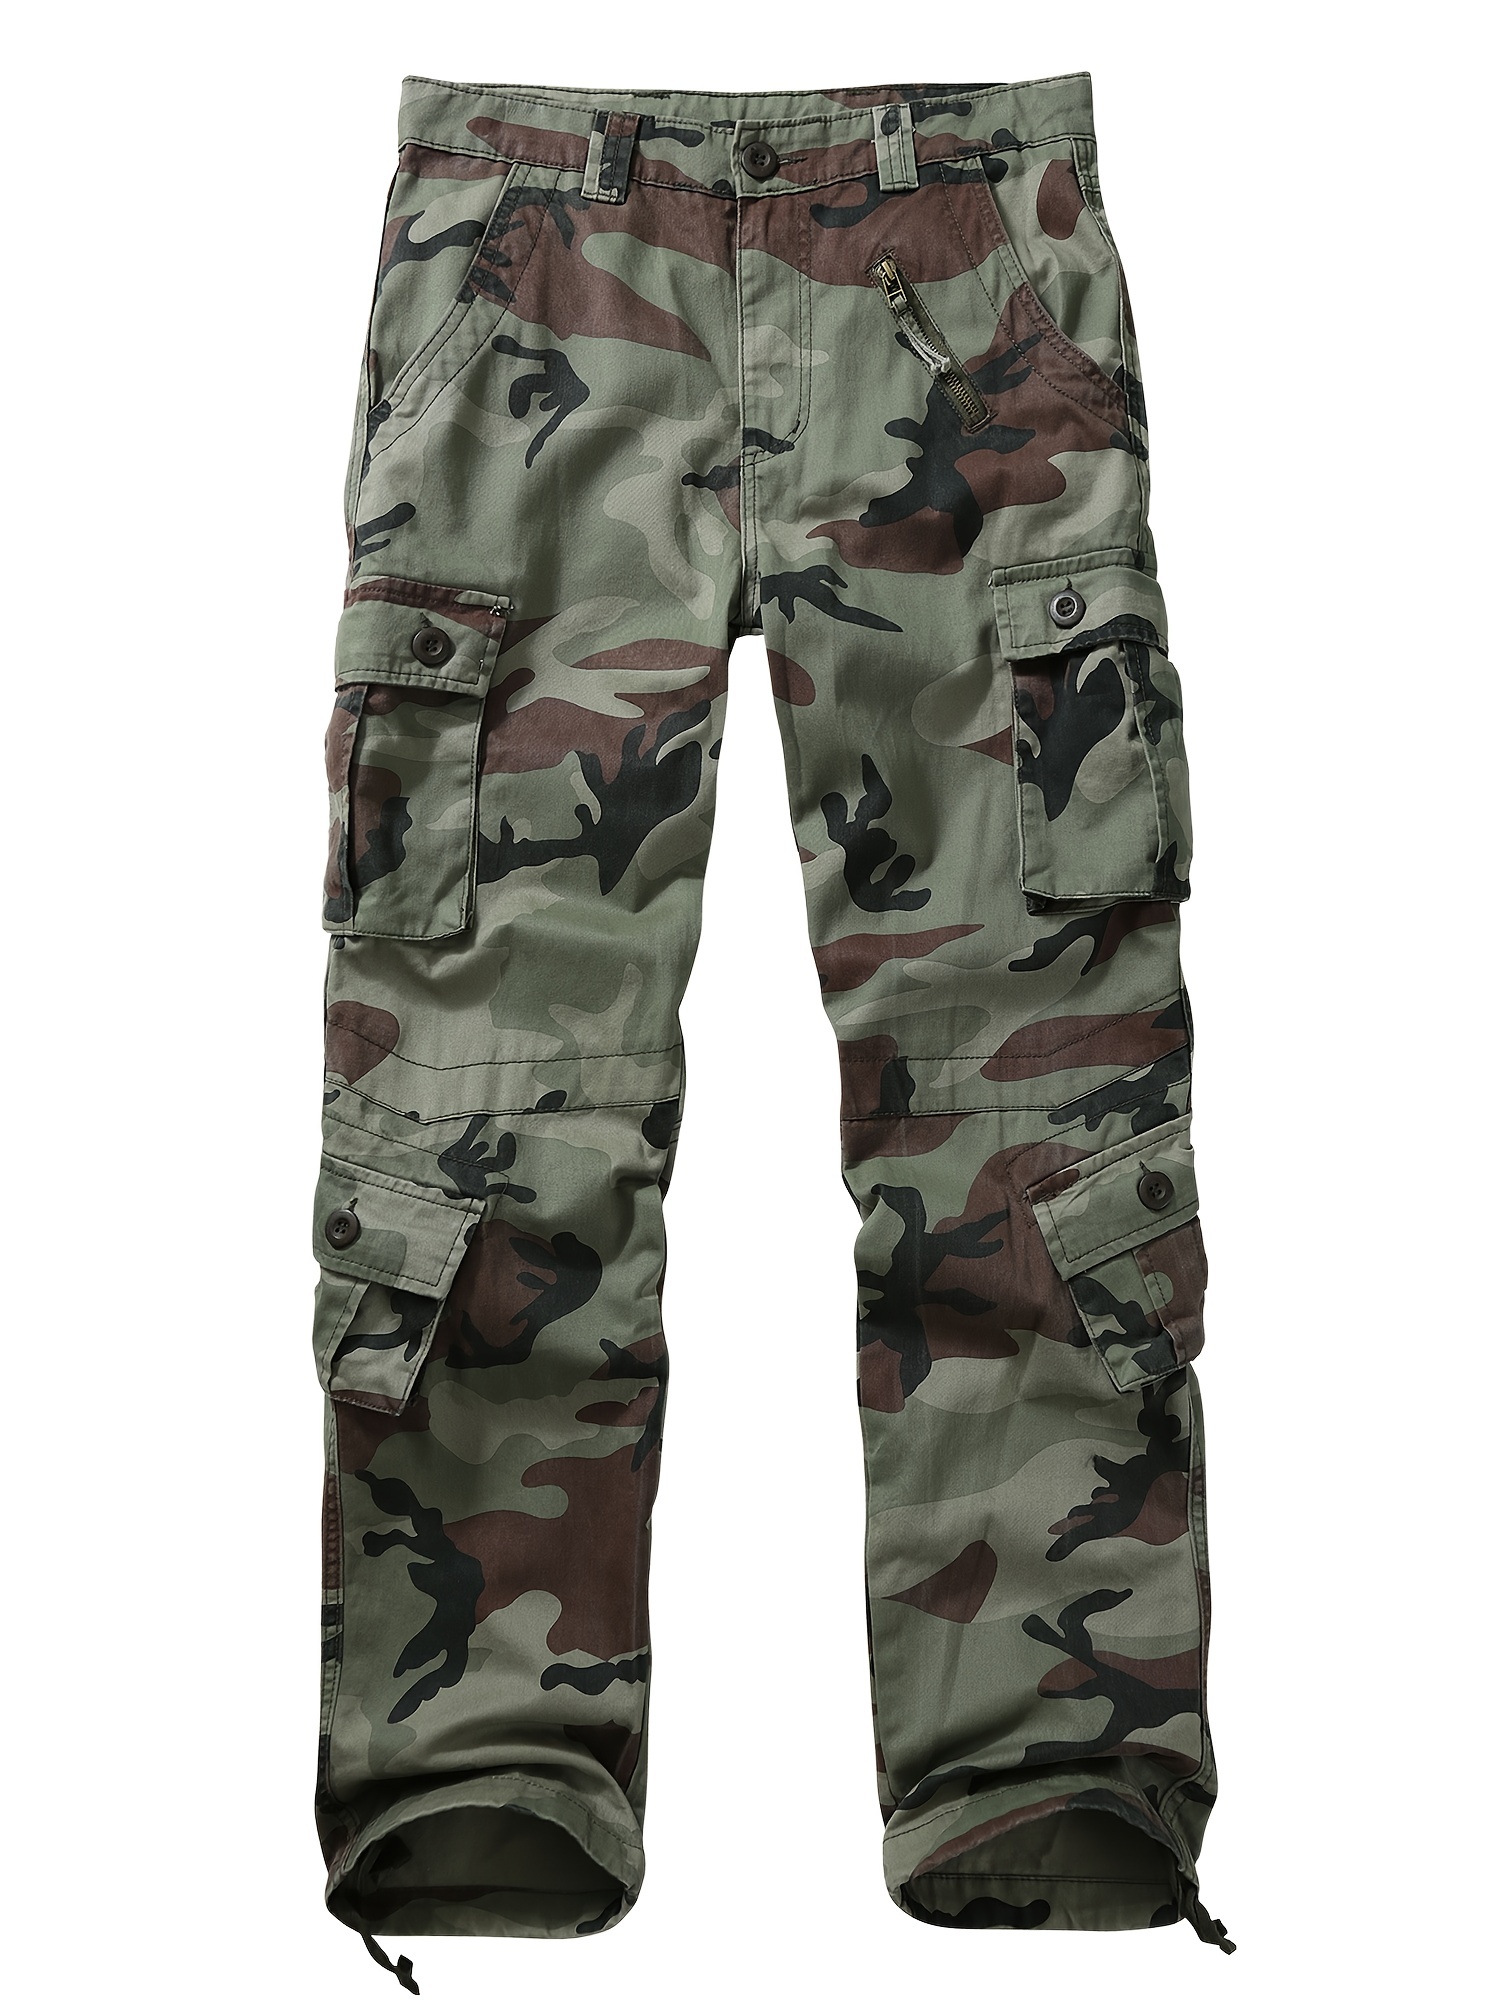 AKNAVY Solid Cotton Camo Multi Flap Pockets Men's Straight Leg Cargo Pants,  Loose Casual Outdoor Pants, Men's Work Pants For Hiking Fishing Angling